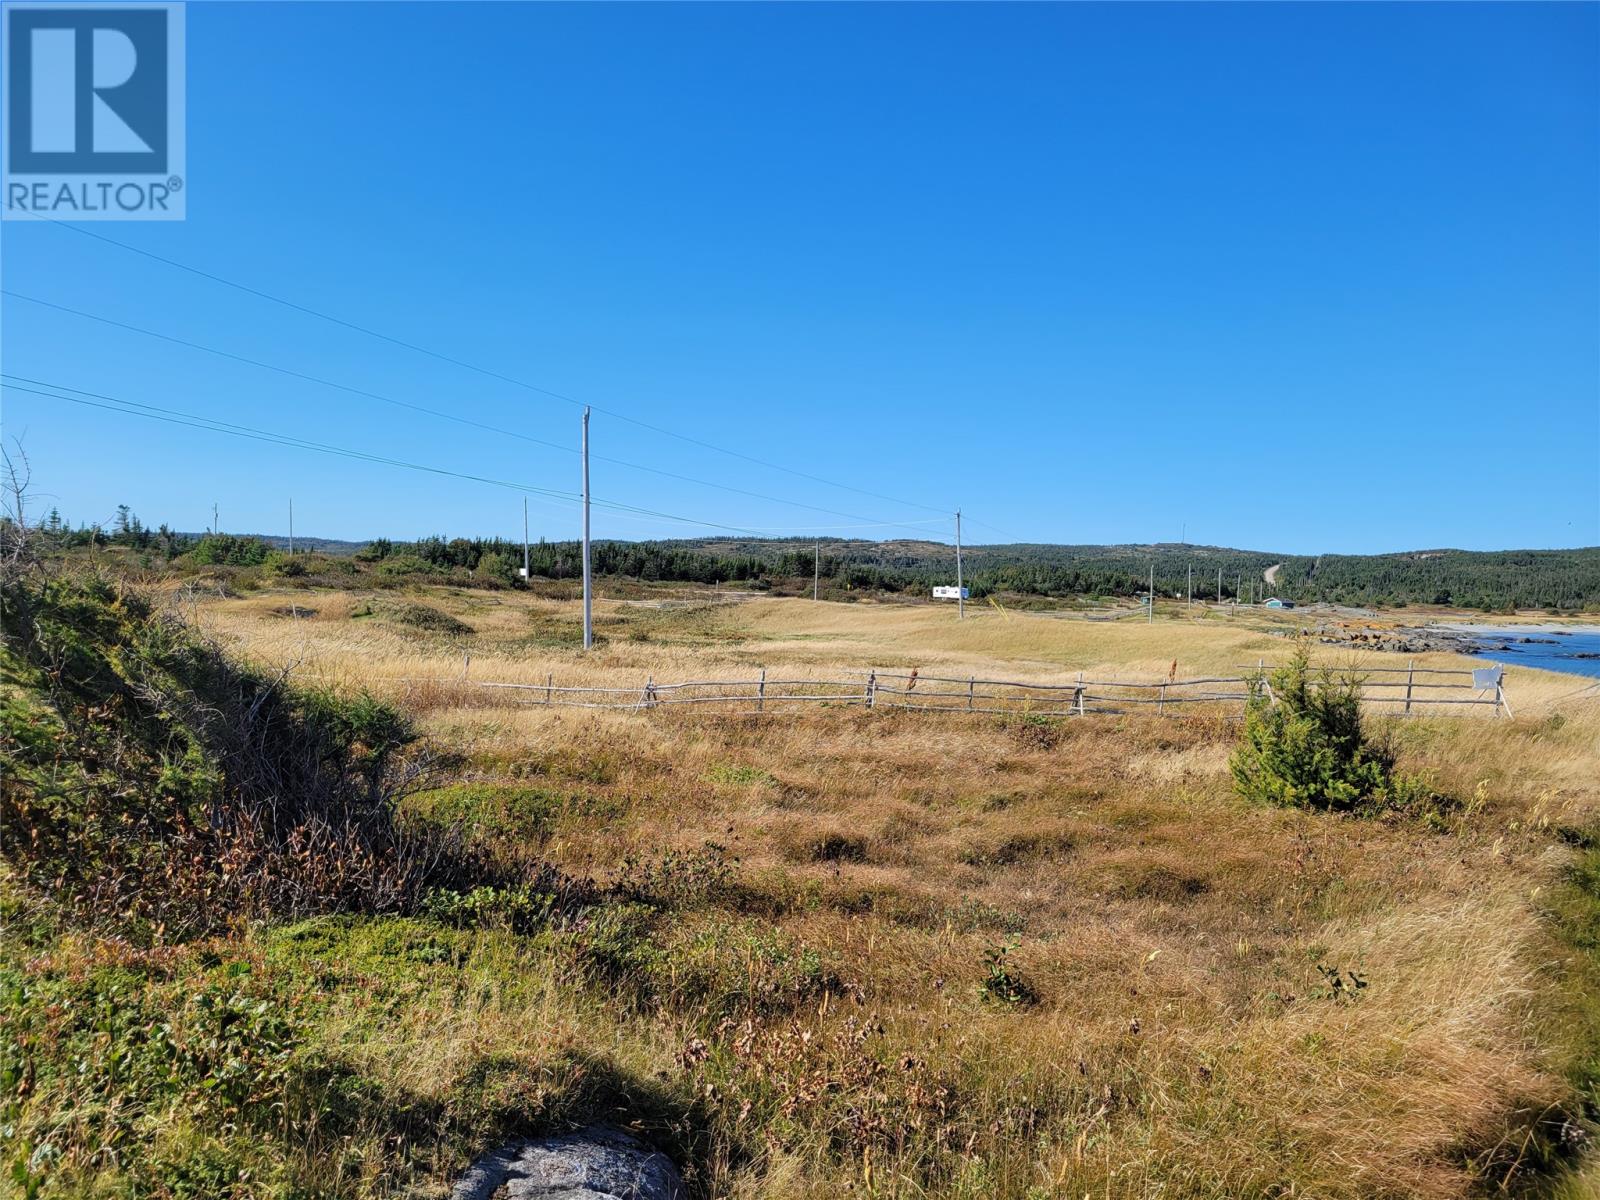 9 Main Road, Fogo Island( Tilting), A0G4H0, ,Vacant land,For sale,Main,1263606